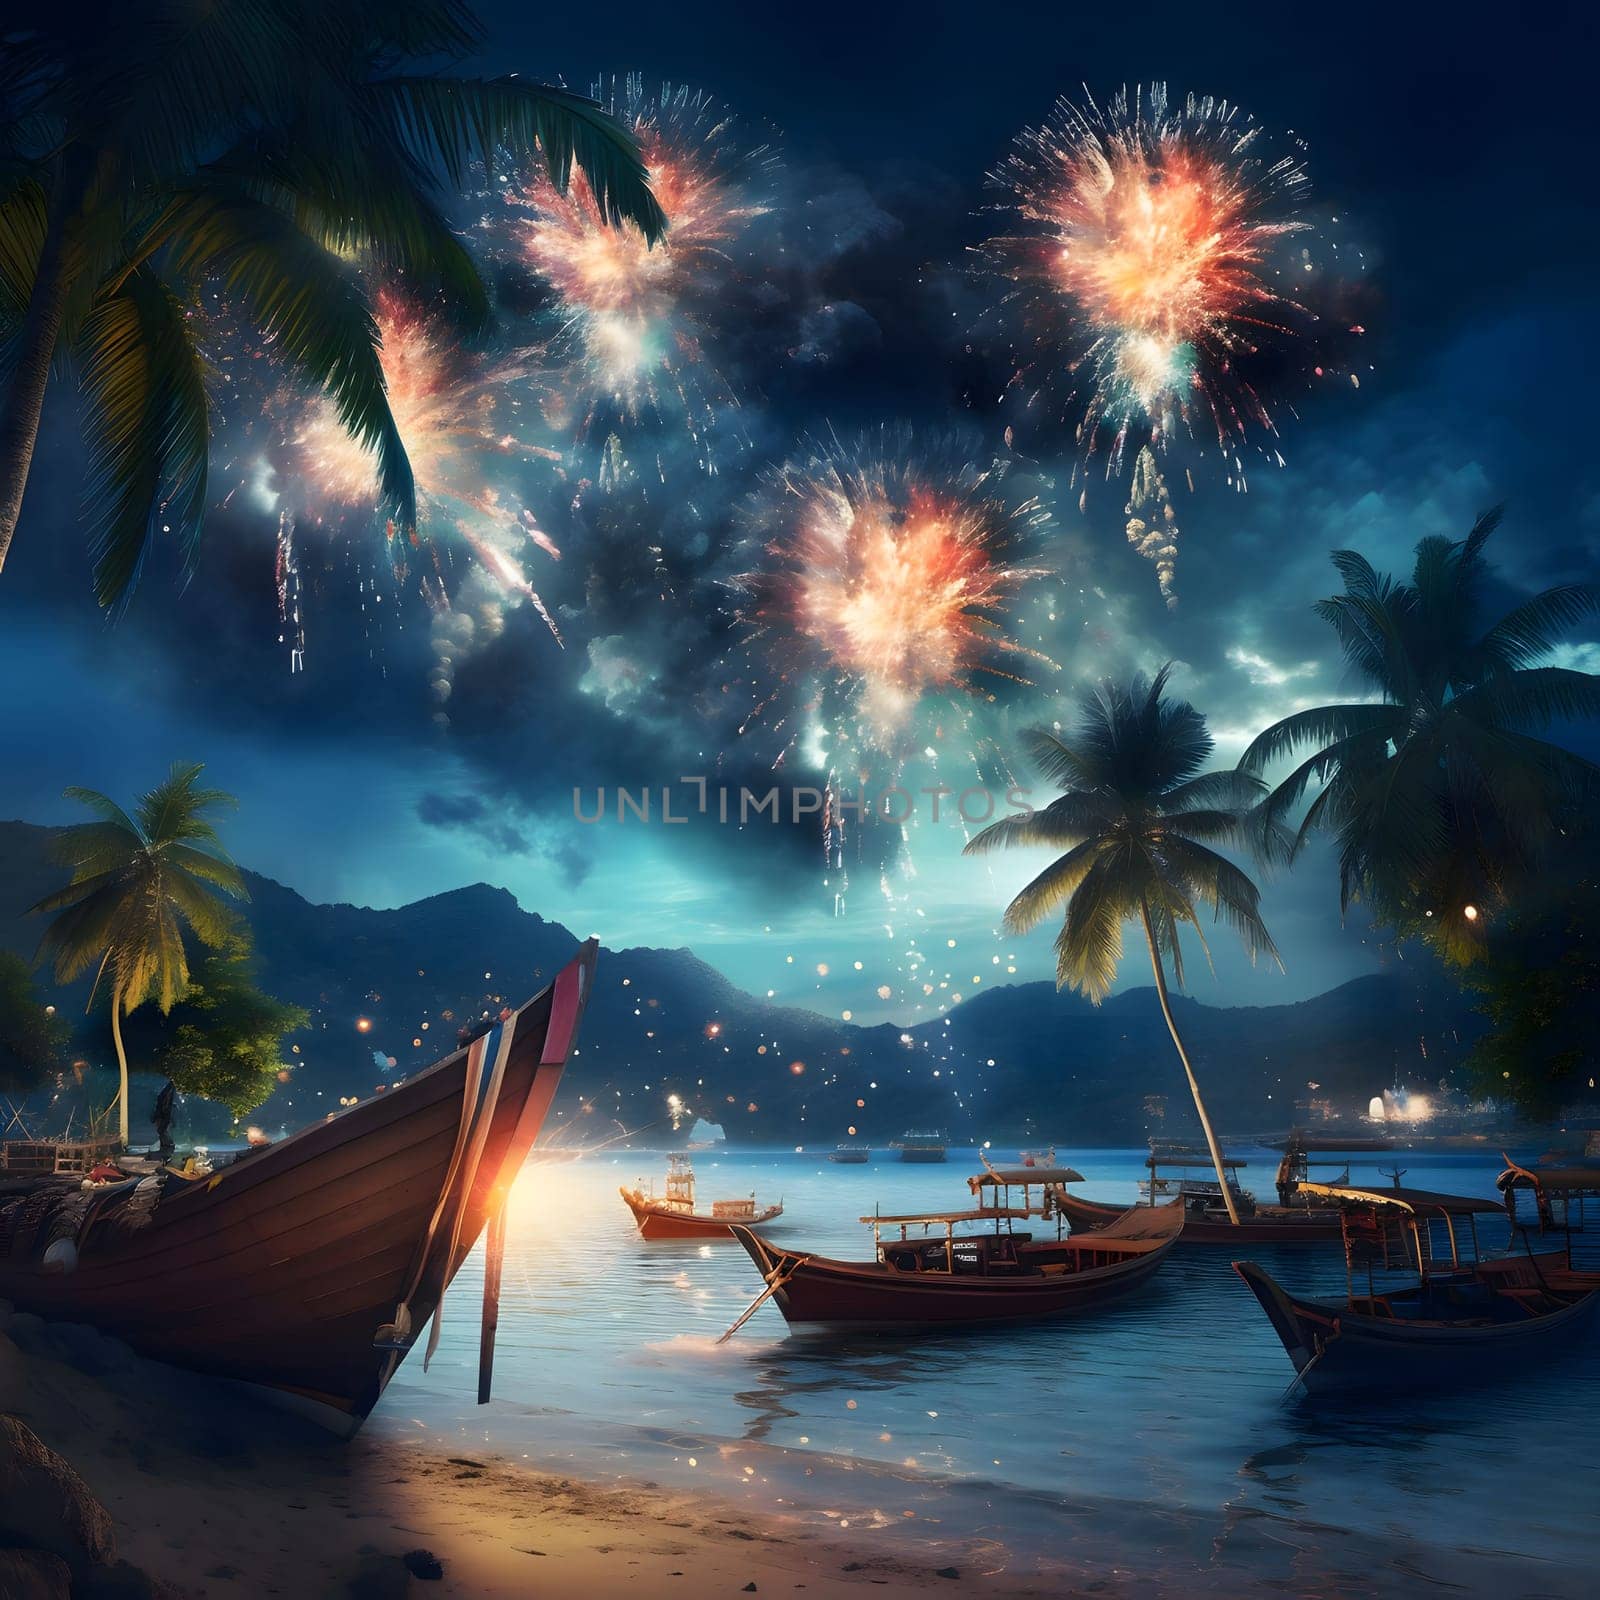 Fireworks show on the beach with empty boats. New Year's fun and festivities. A time of celebration and resolutions.